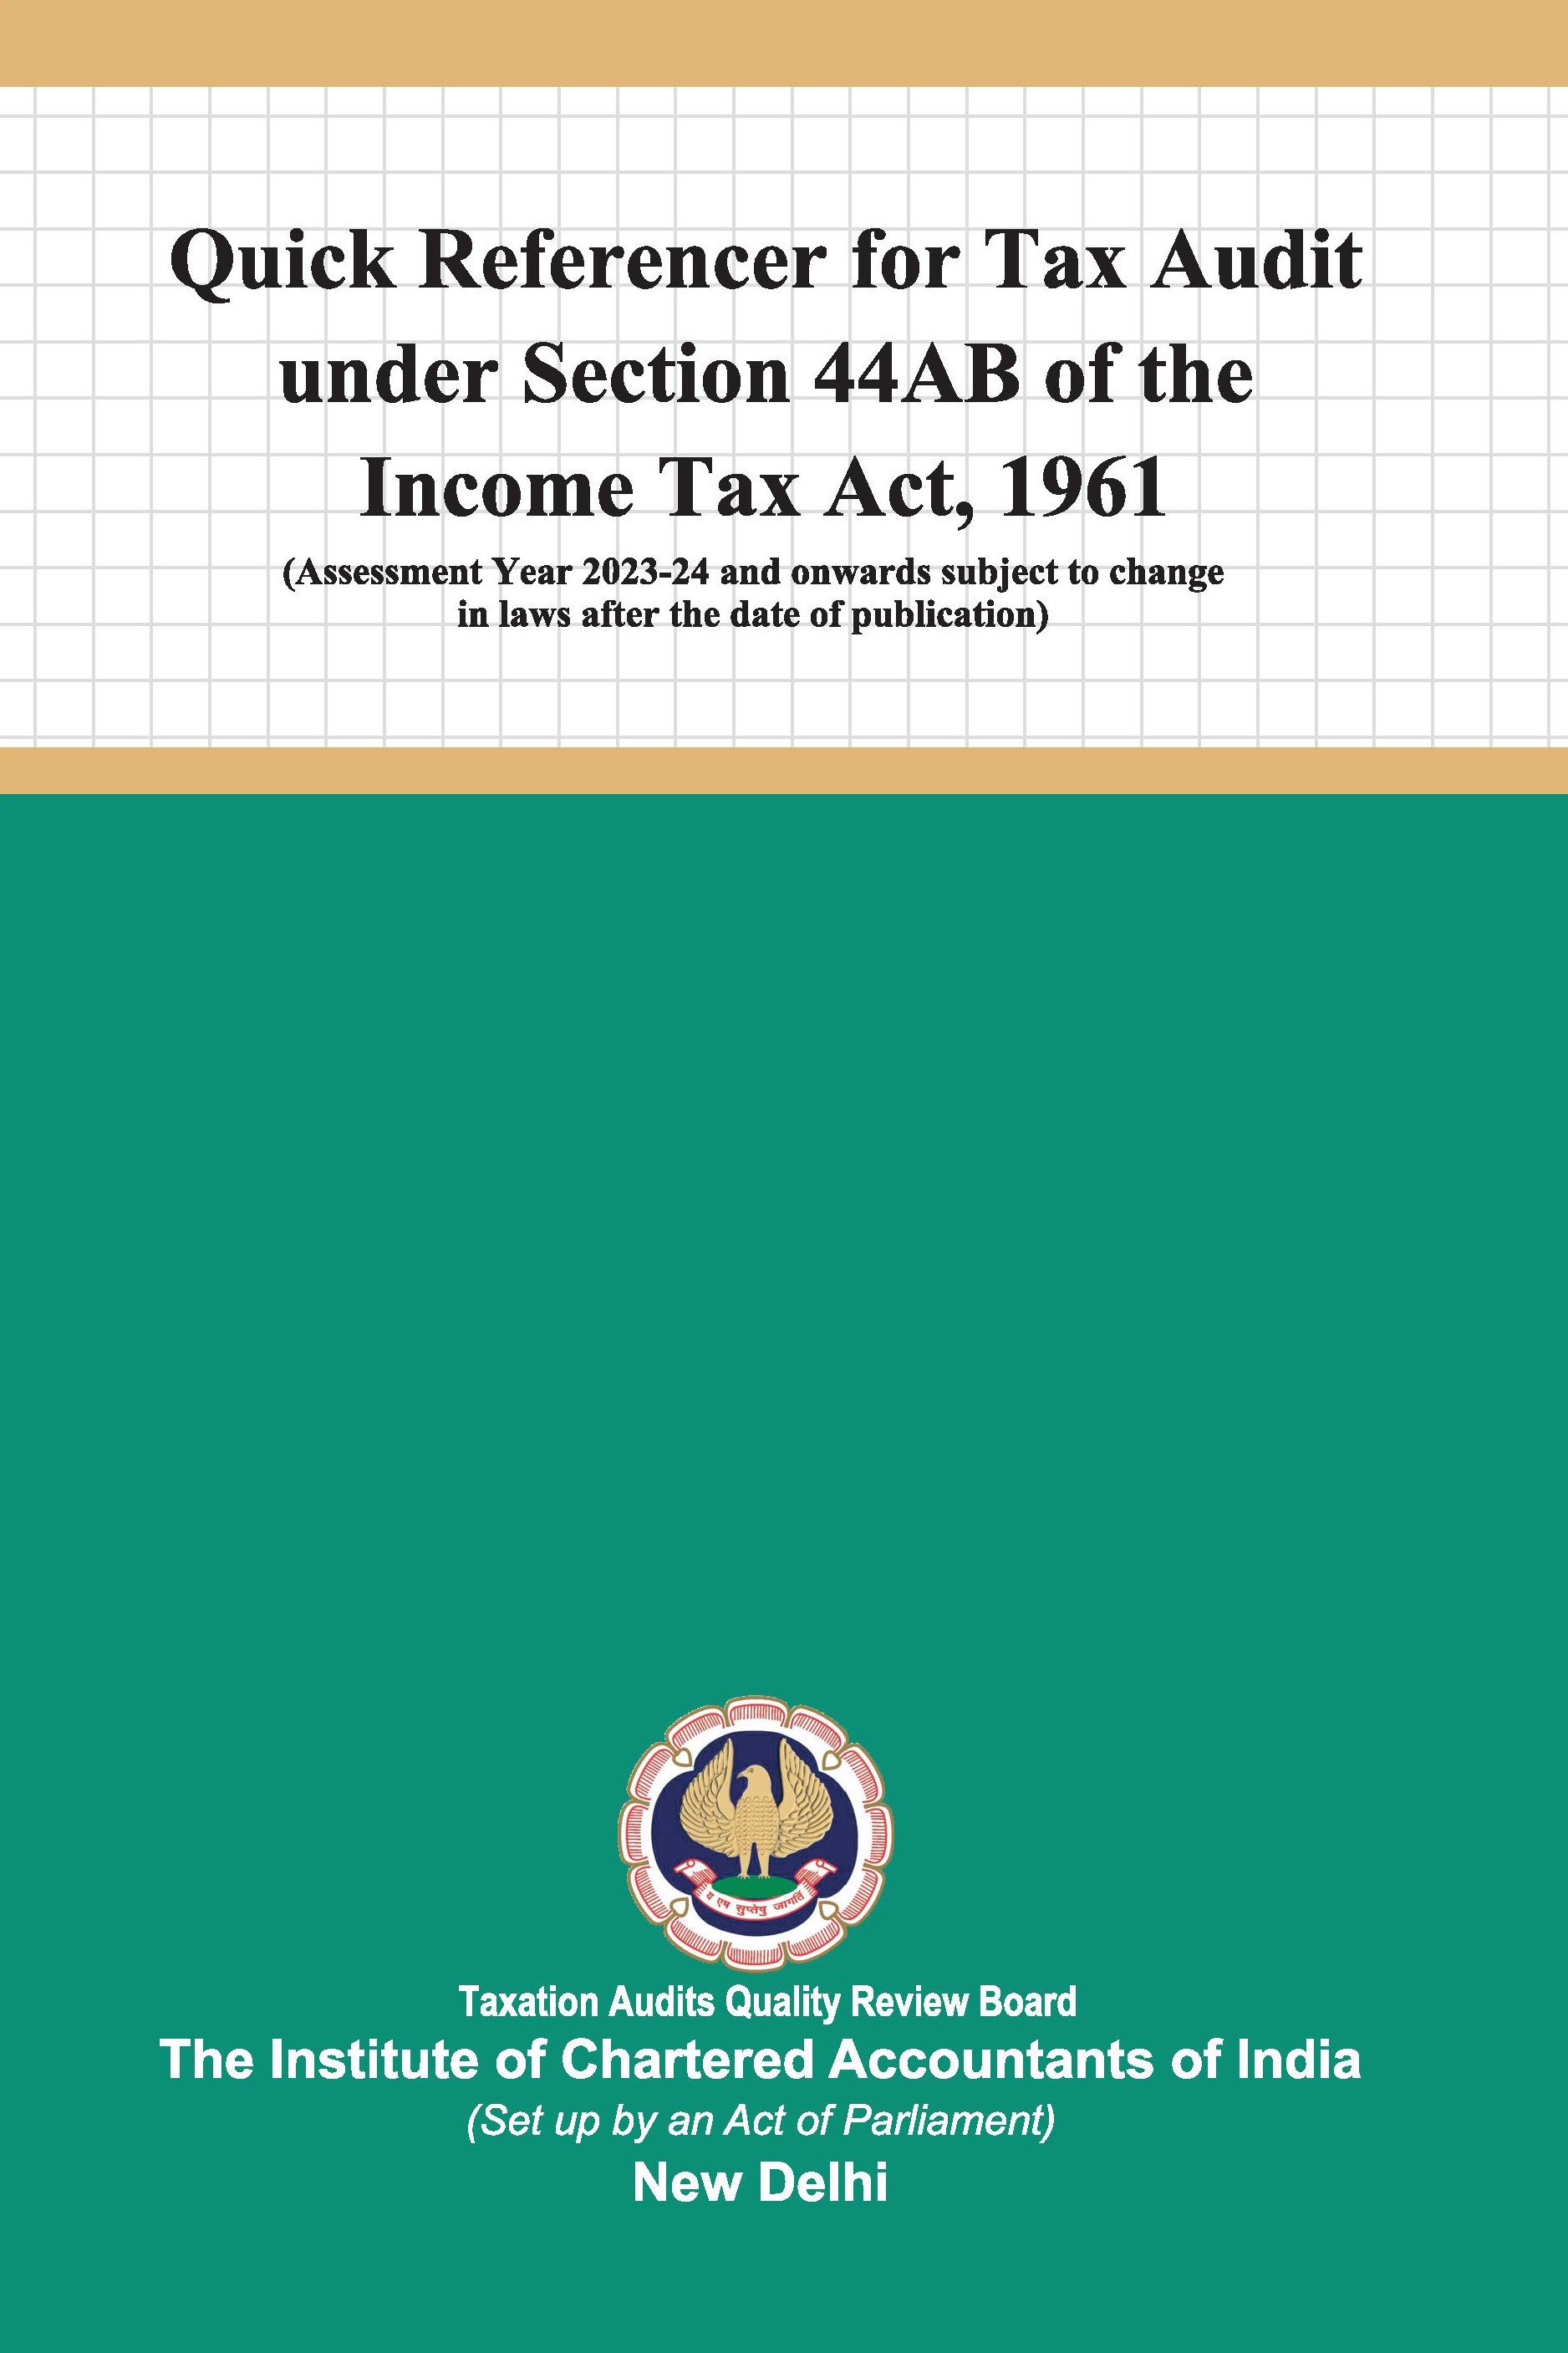 Quick Referencer for Tax Audit under Section 44AB of the Income Tax Act, 1961